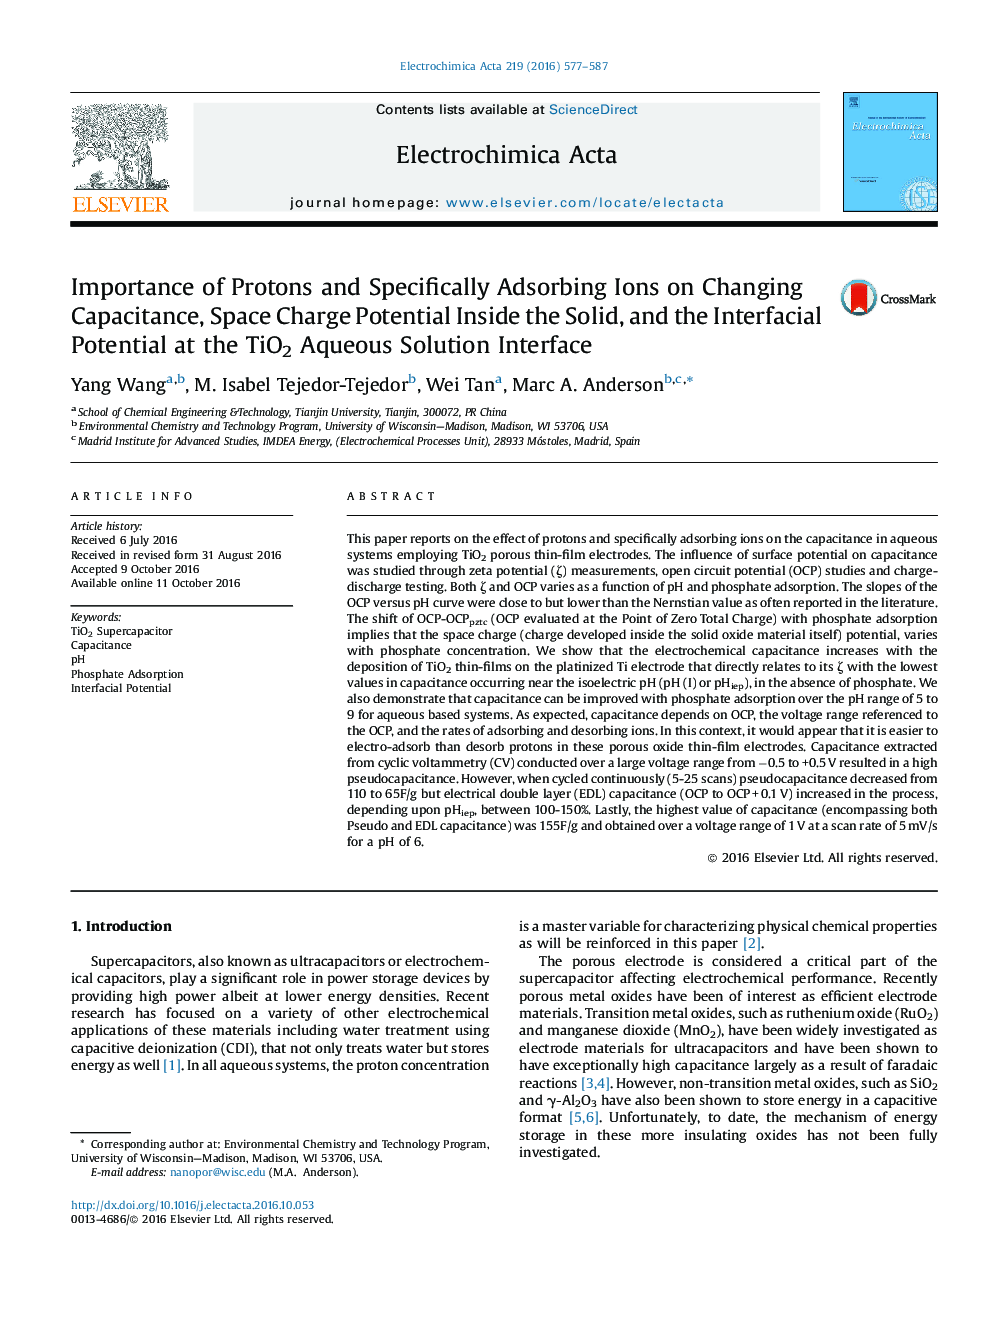 Importance of Protons and Specifically Adsorbing Ions on Changing Capacitance, Space Charge Potential Inside the Solid, and the Interfacial Potential at the TiO2 Aqueous Solution Interface